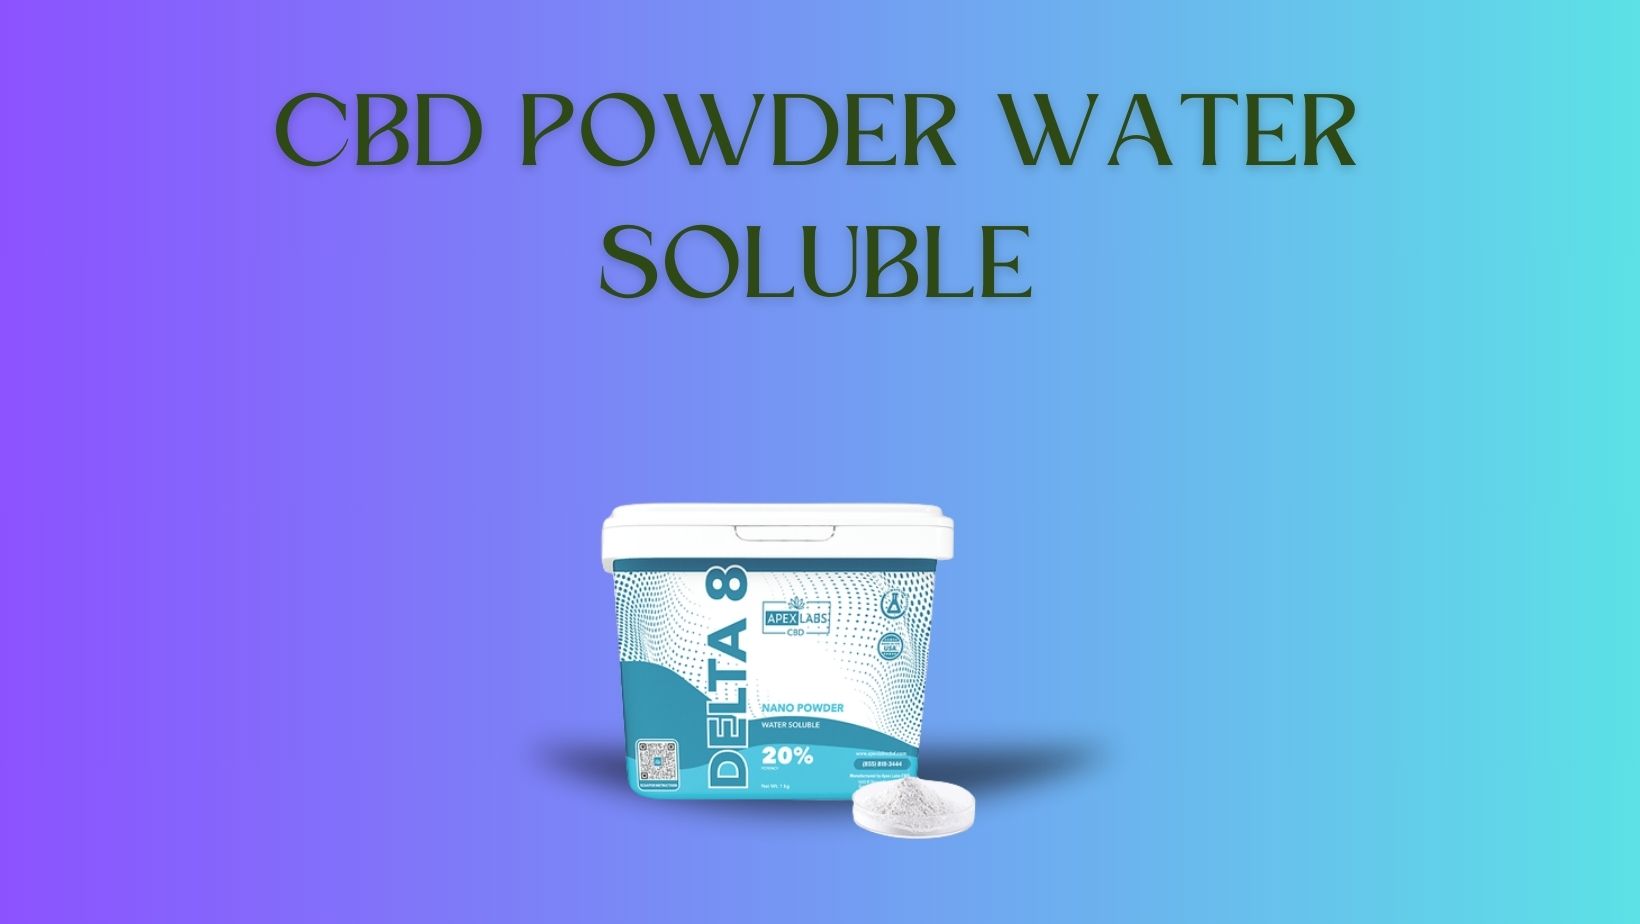 Is CBD Powder Water Soluble the Right Choice for You?